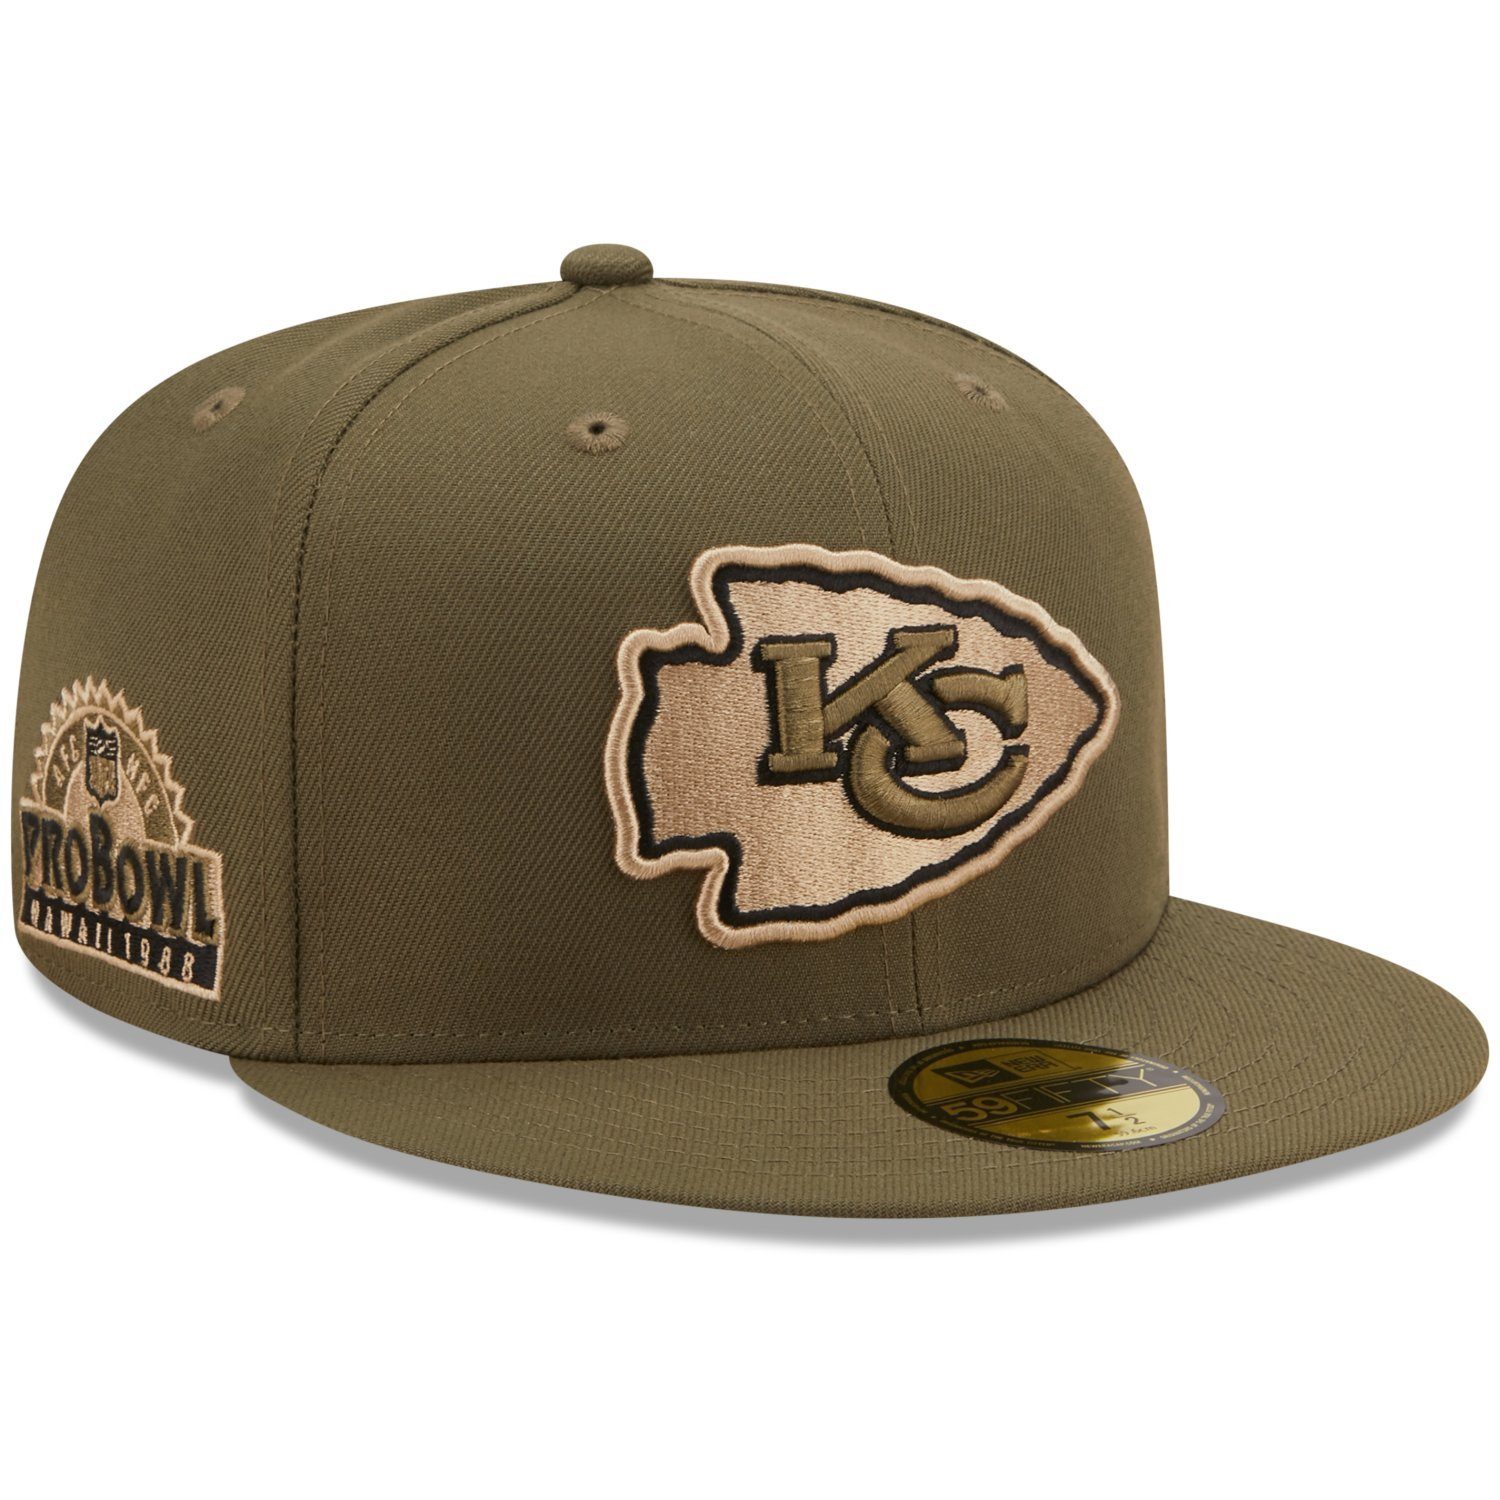 New Era Fitted Cap 59Fifty NFL Throwback Superbowl ProBowl Kansas City Chiefs | Fitted Caps